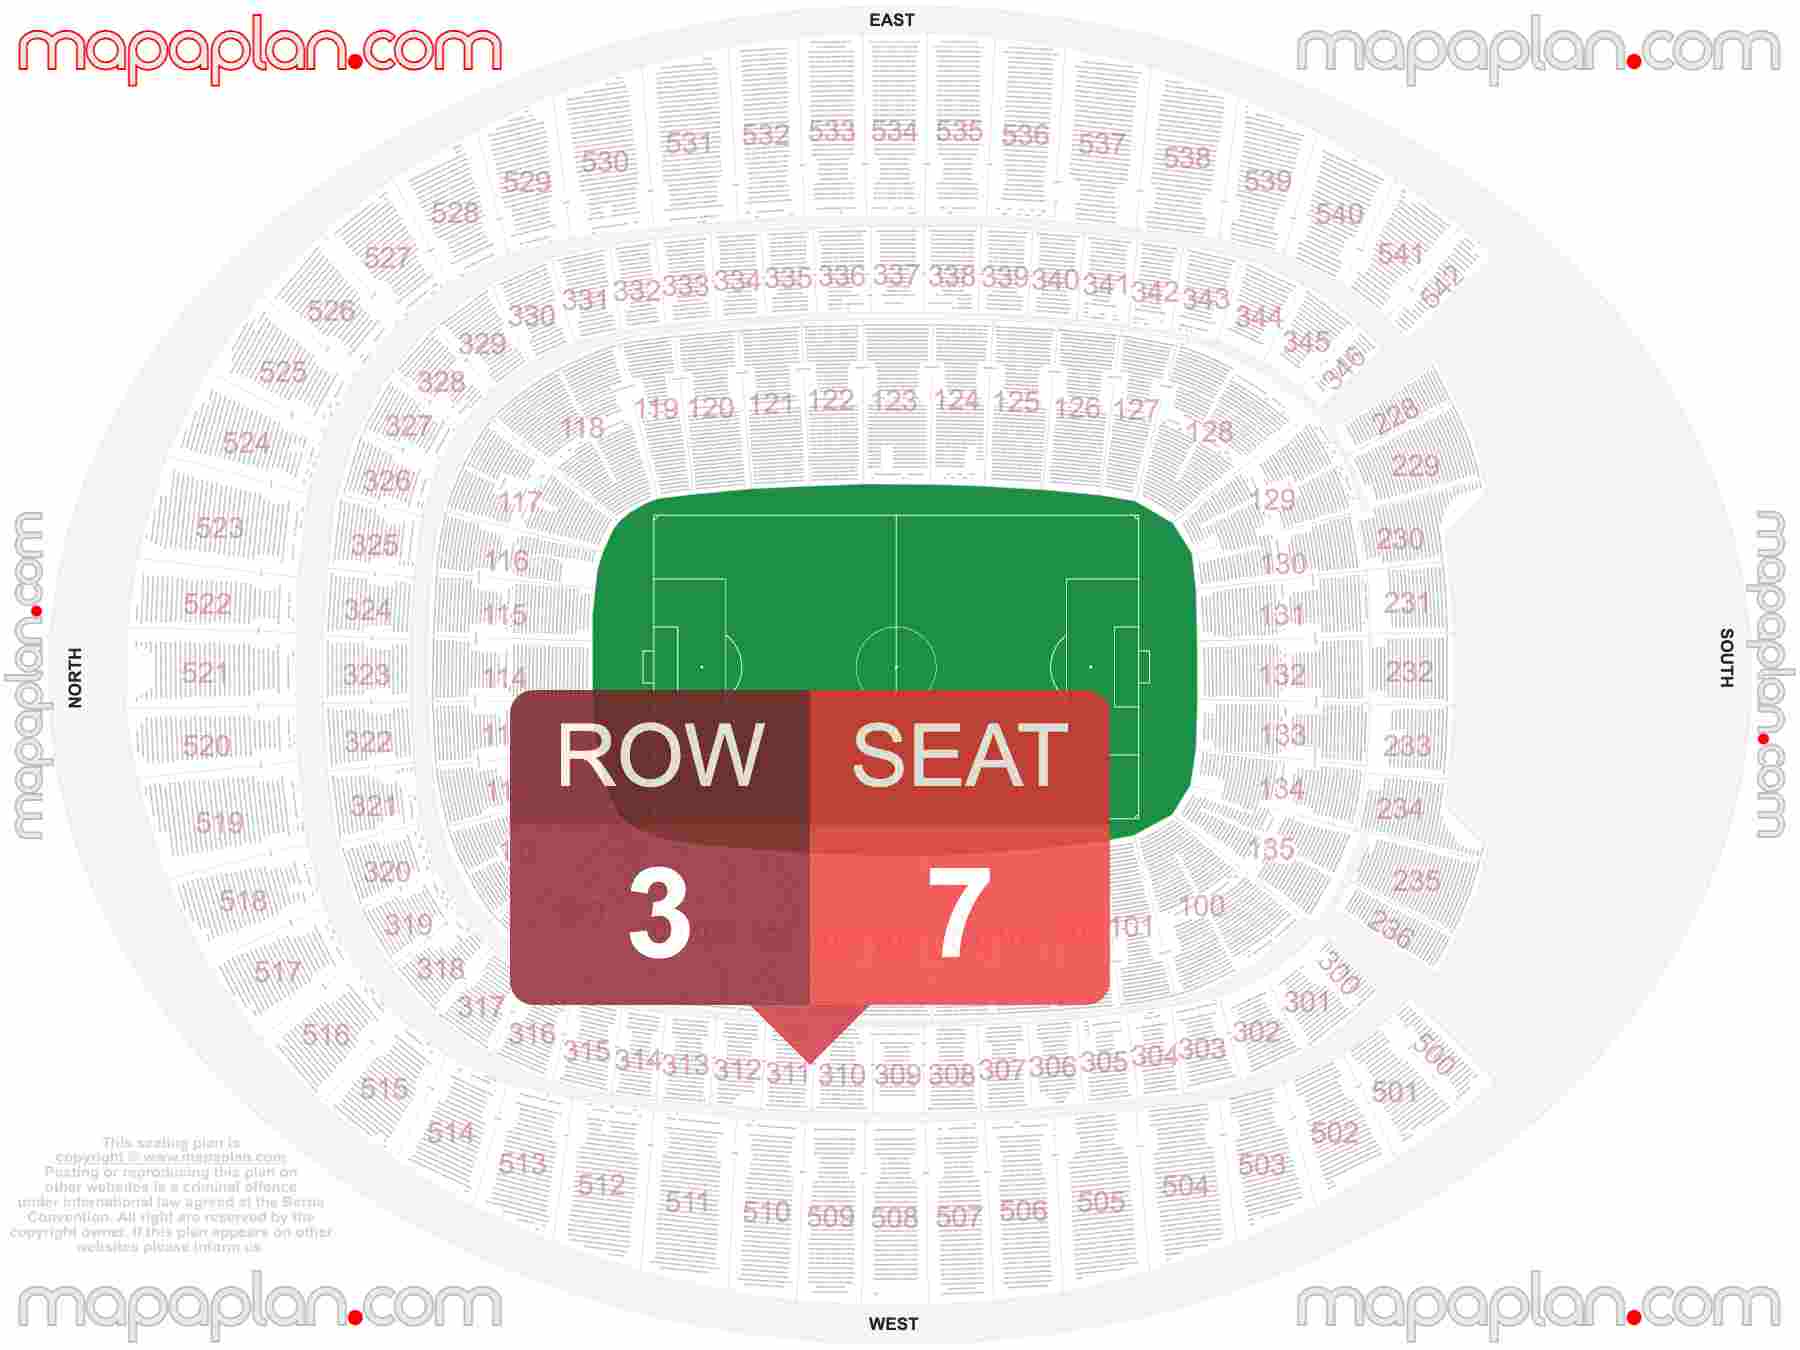 Denver Empower Field at Mile High seating chart Soccer & Broncos football inside capacity view arrangement plan - Interactive virtual 3d best seats & rows detailed stadium image configuration layout